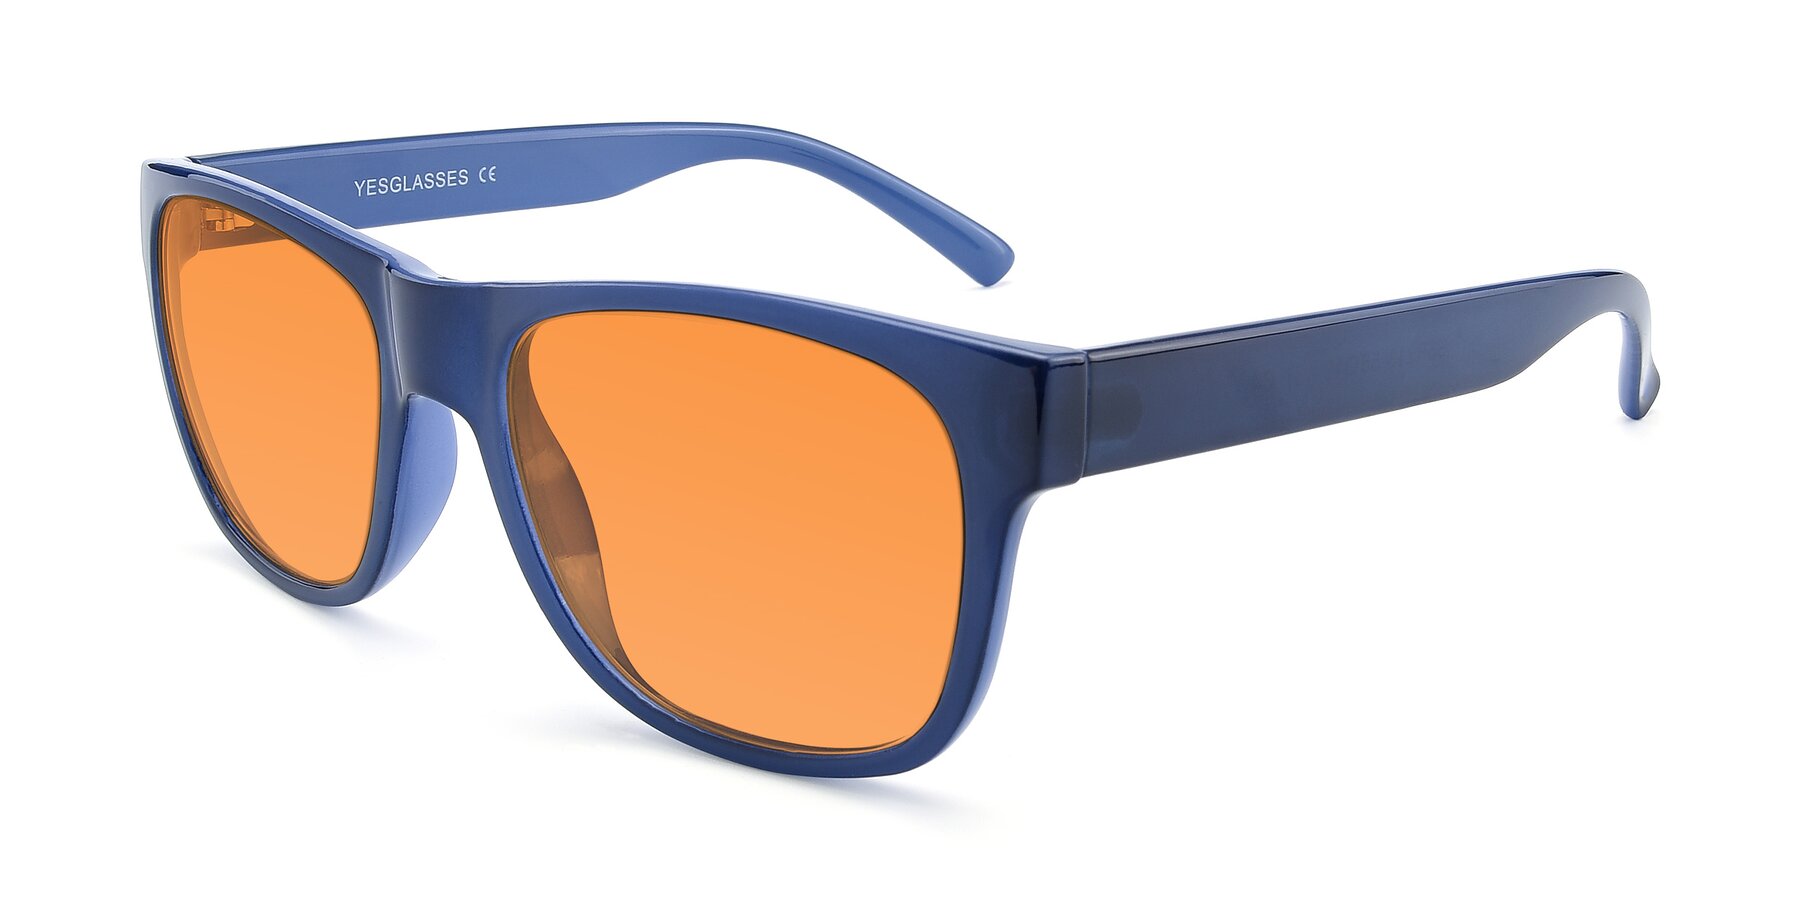 Angle of SSR213 in Blue with Orange Tinted Lenses